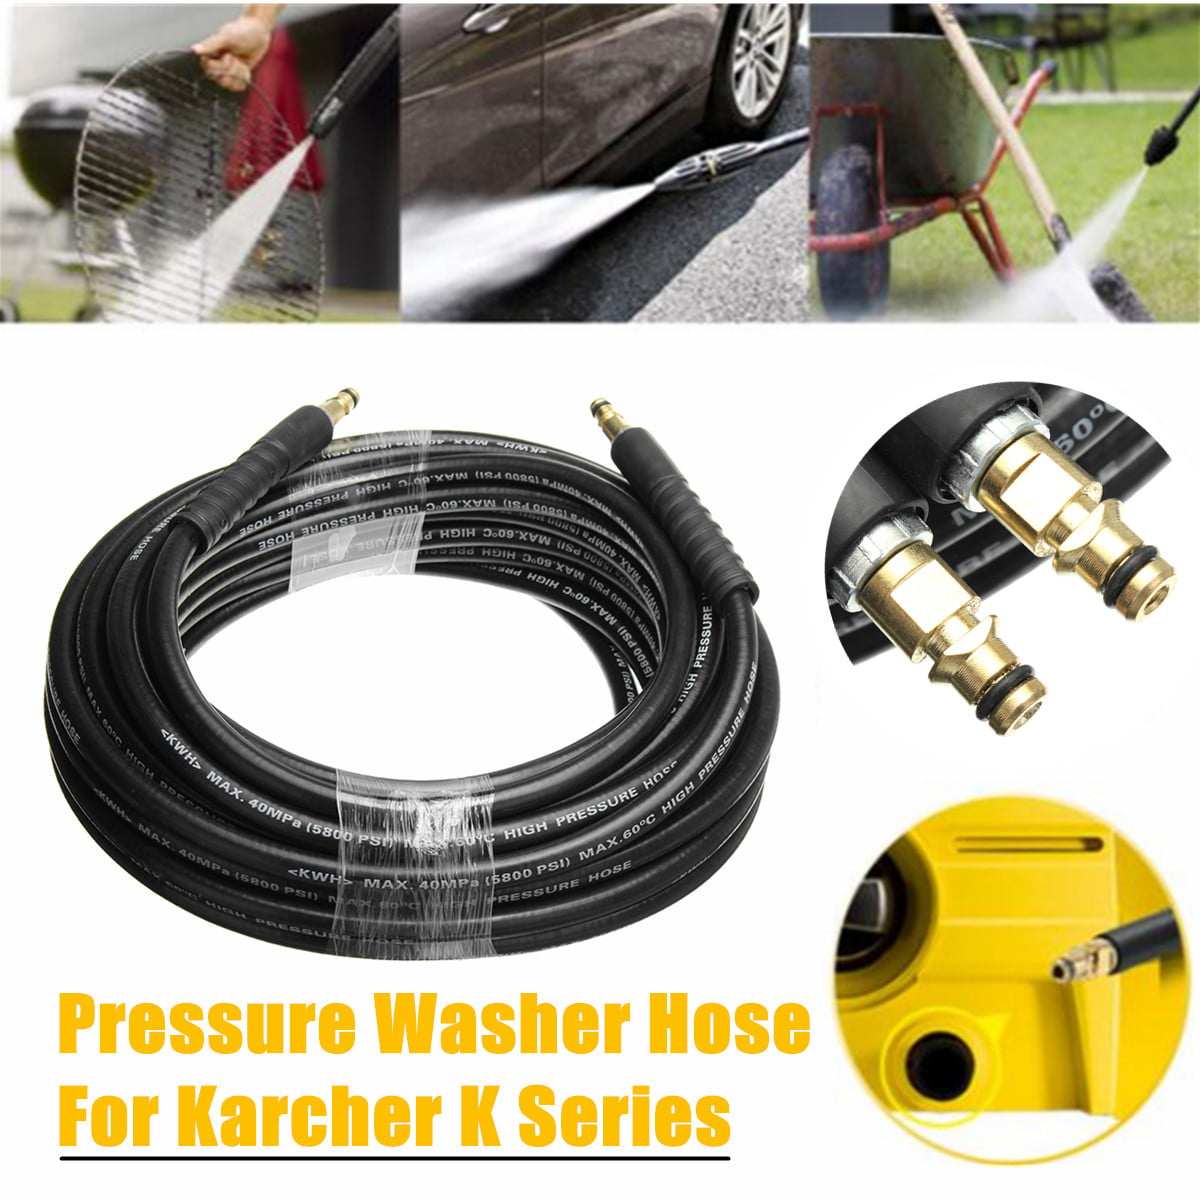 10m High Pressure Washer Hose Carwash Water Cleaning Hose Extension Hose 